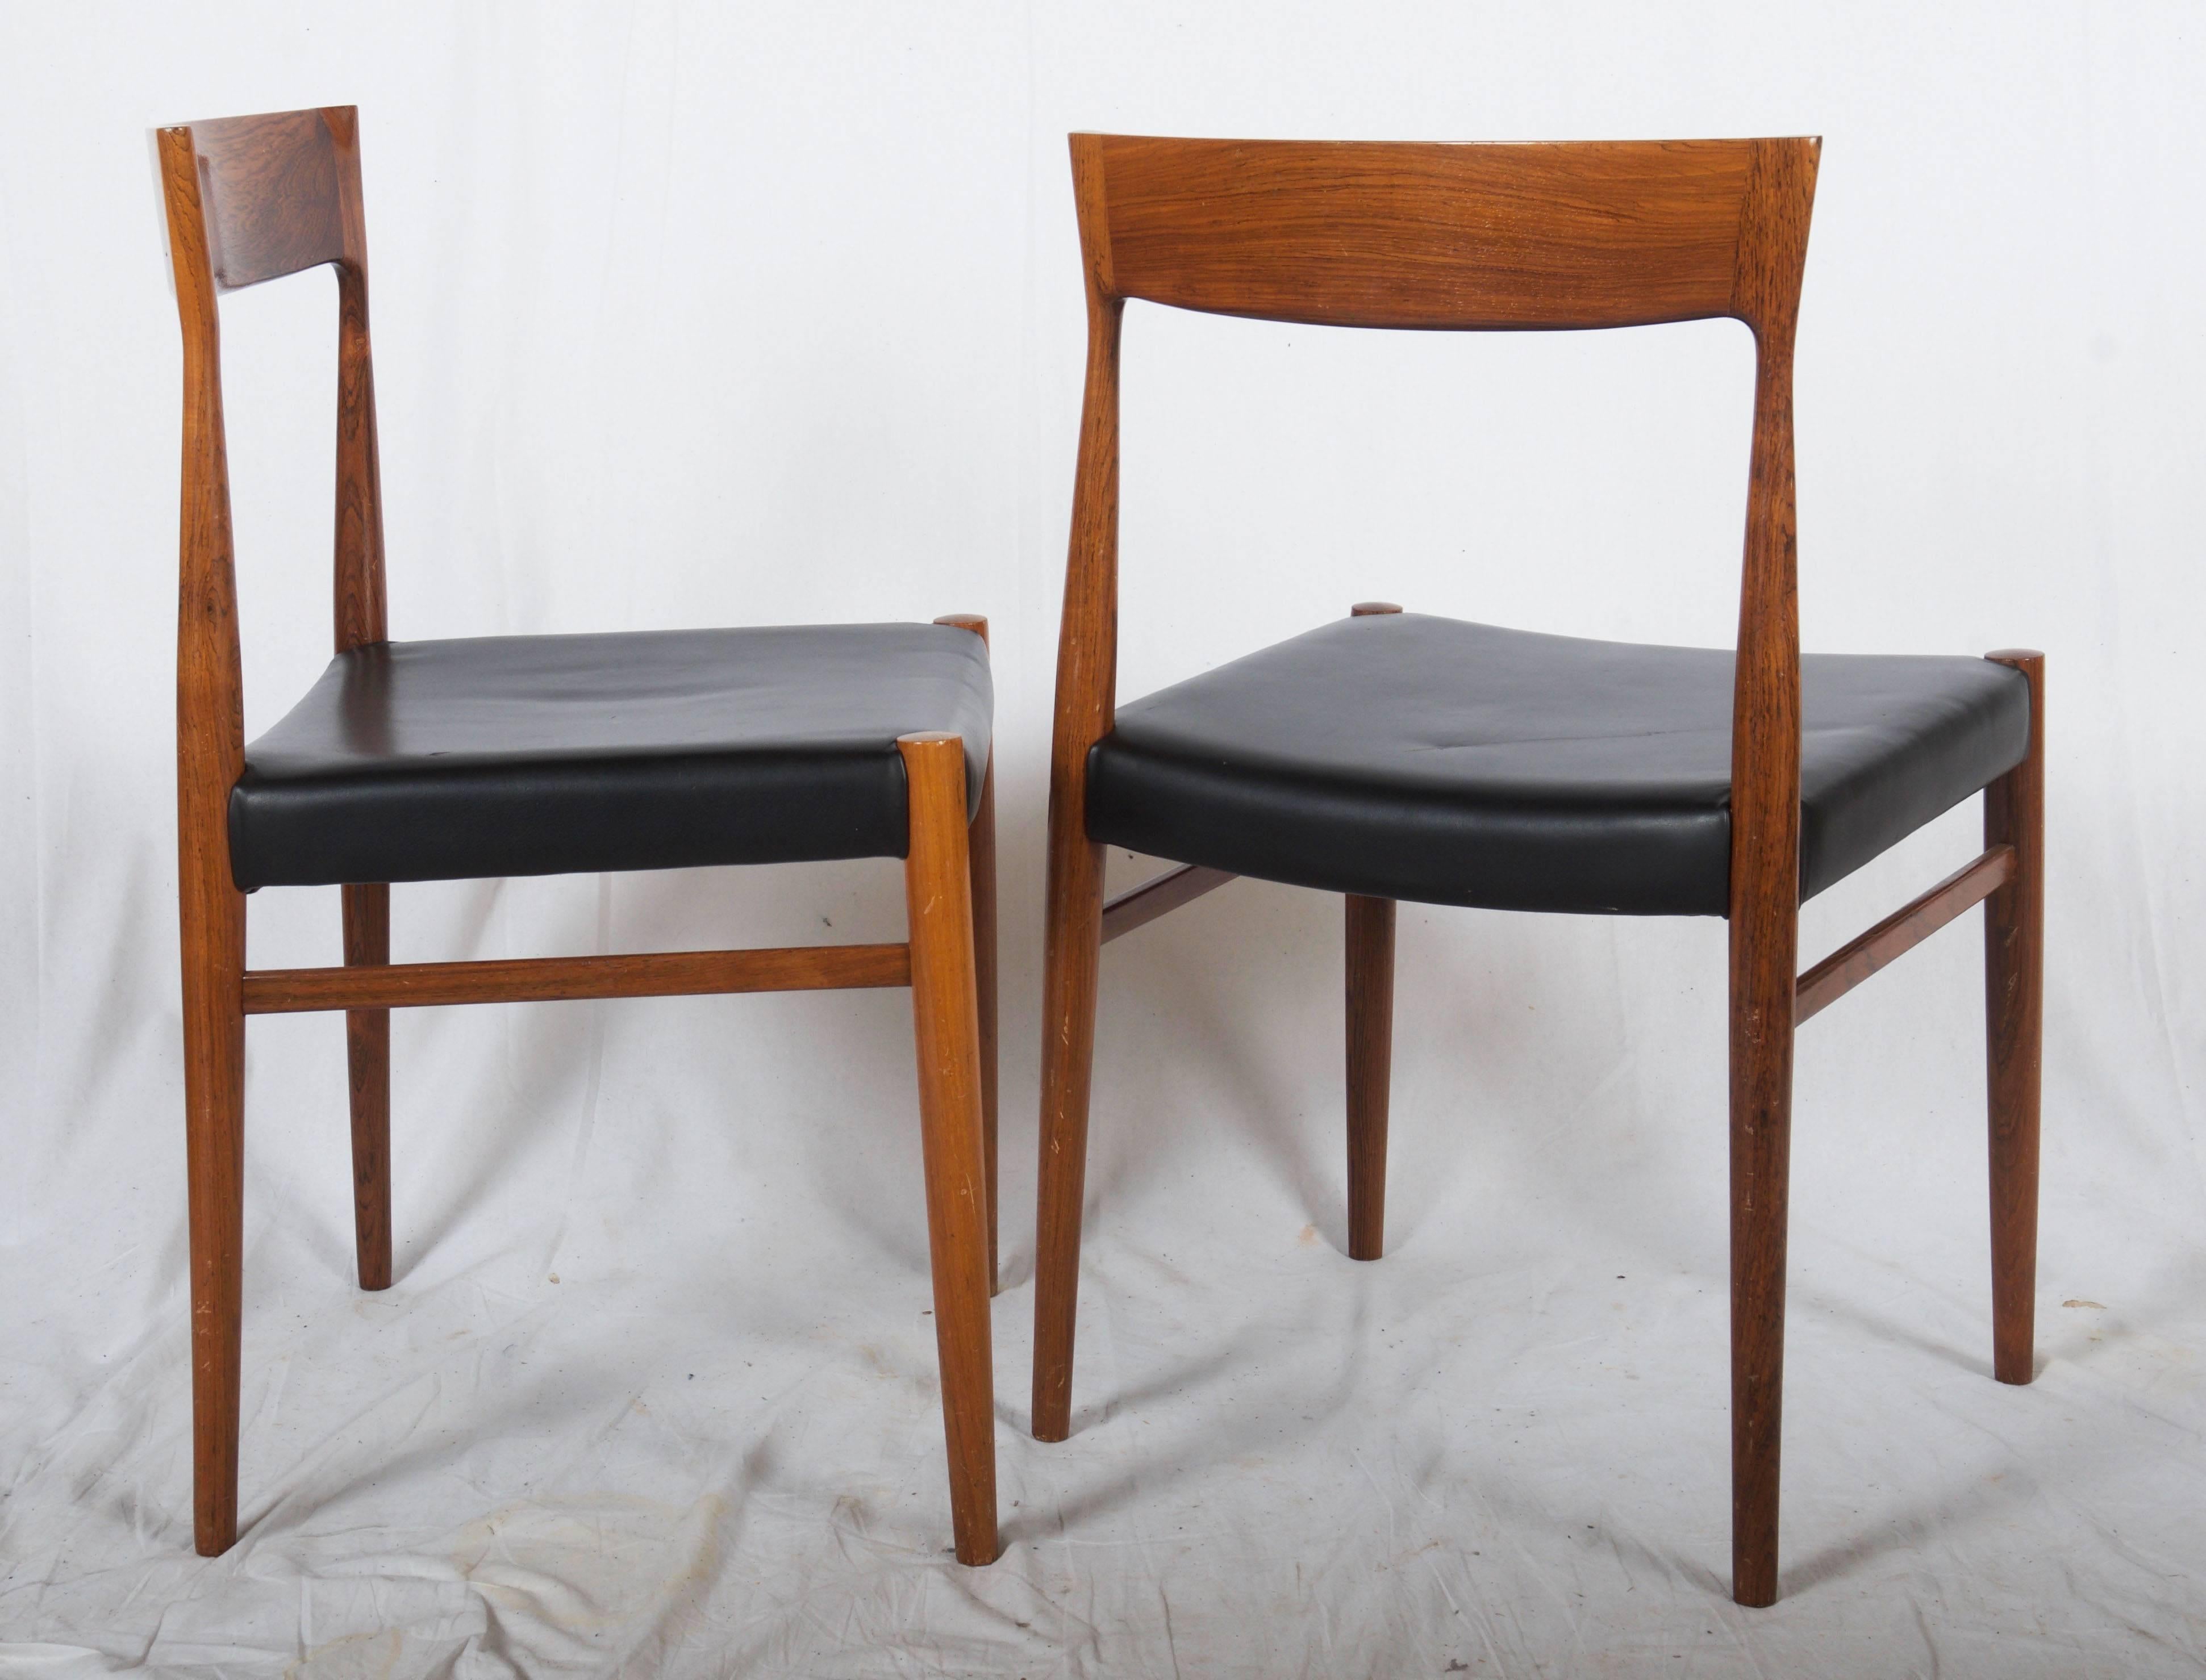 Hardwood frame, seat upholstered in synthetic leather, produced in Denmark in the 1960s. Construction is similar to Niels Otto Møller model 77 chairs. Wood in excellent condition, a new upholstery is of course on request possible in any kind of